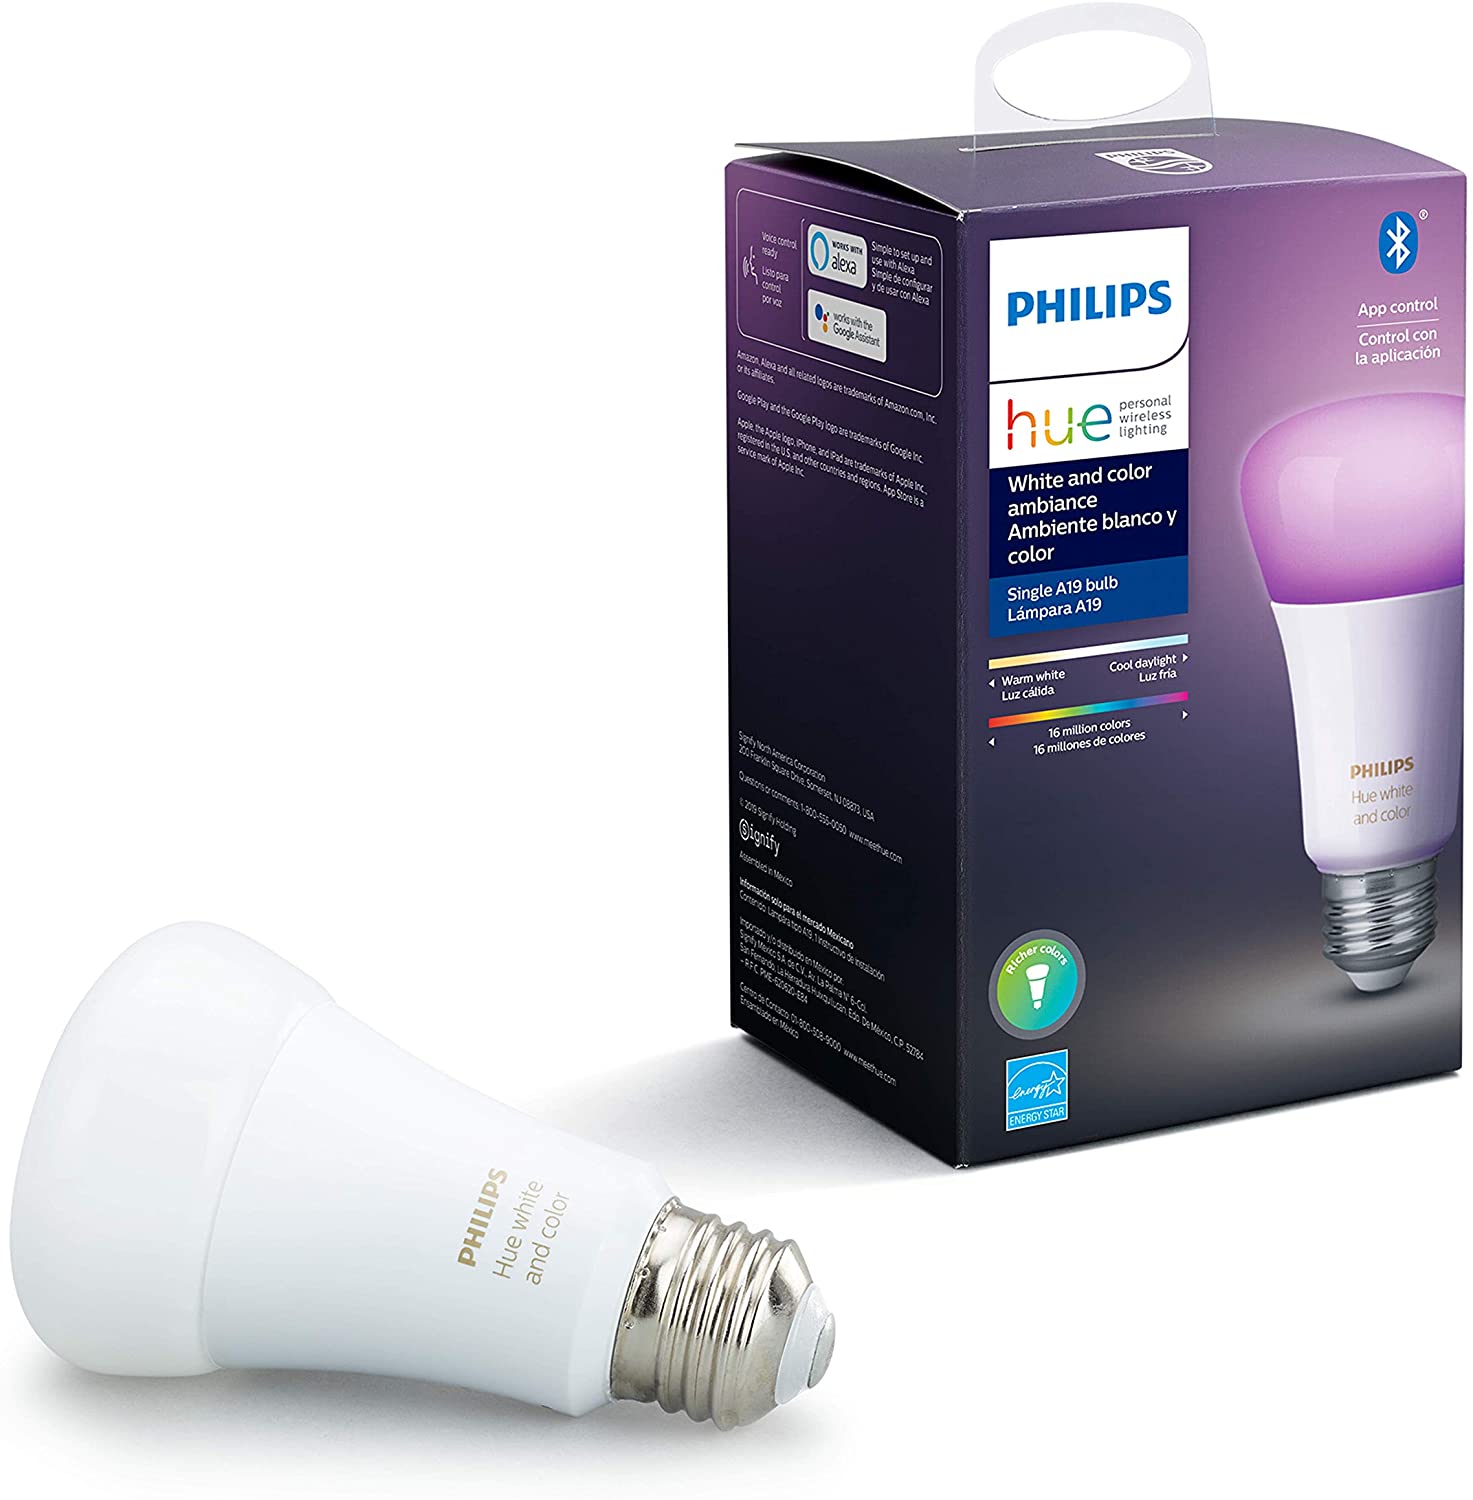 1586371039 71 What are the best accessories for your Philips Hue smart